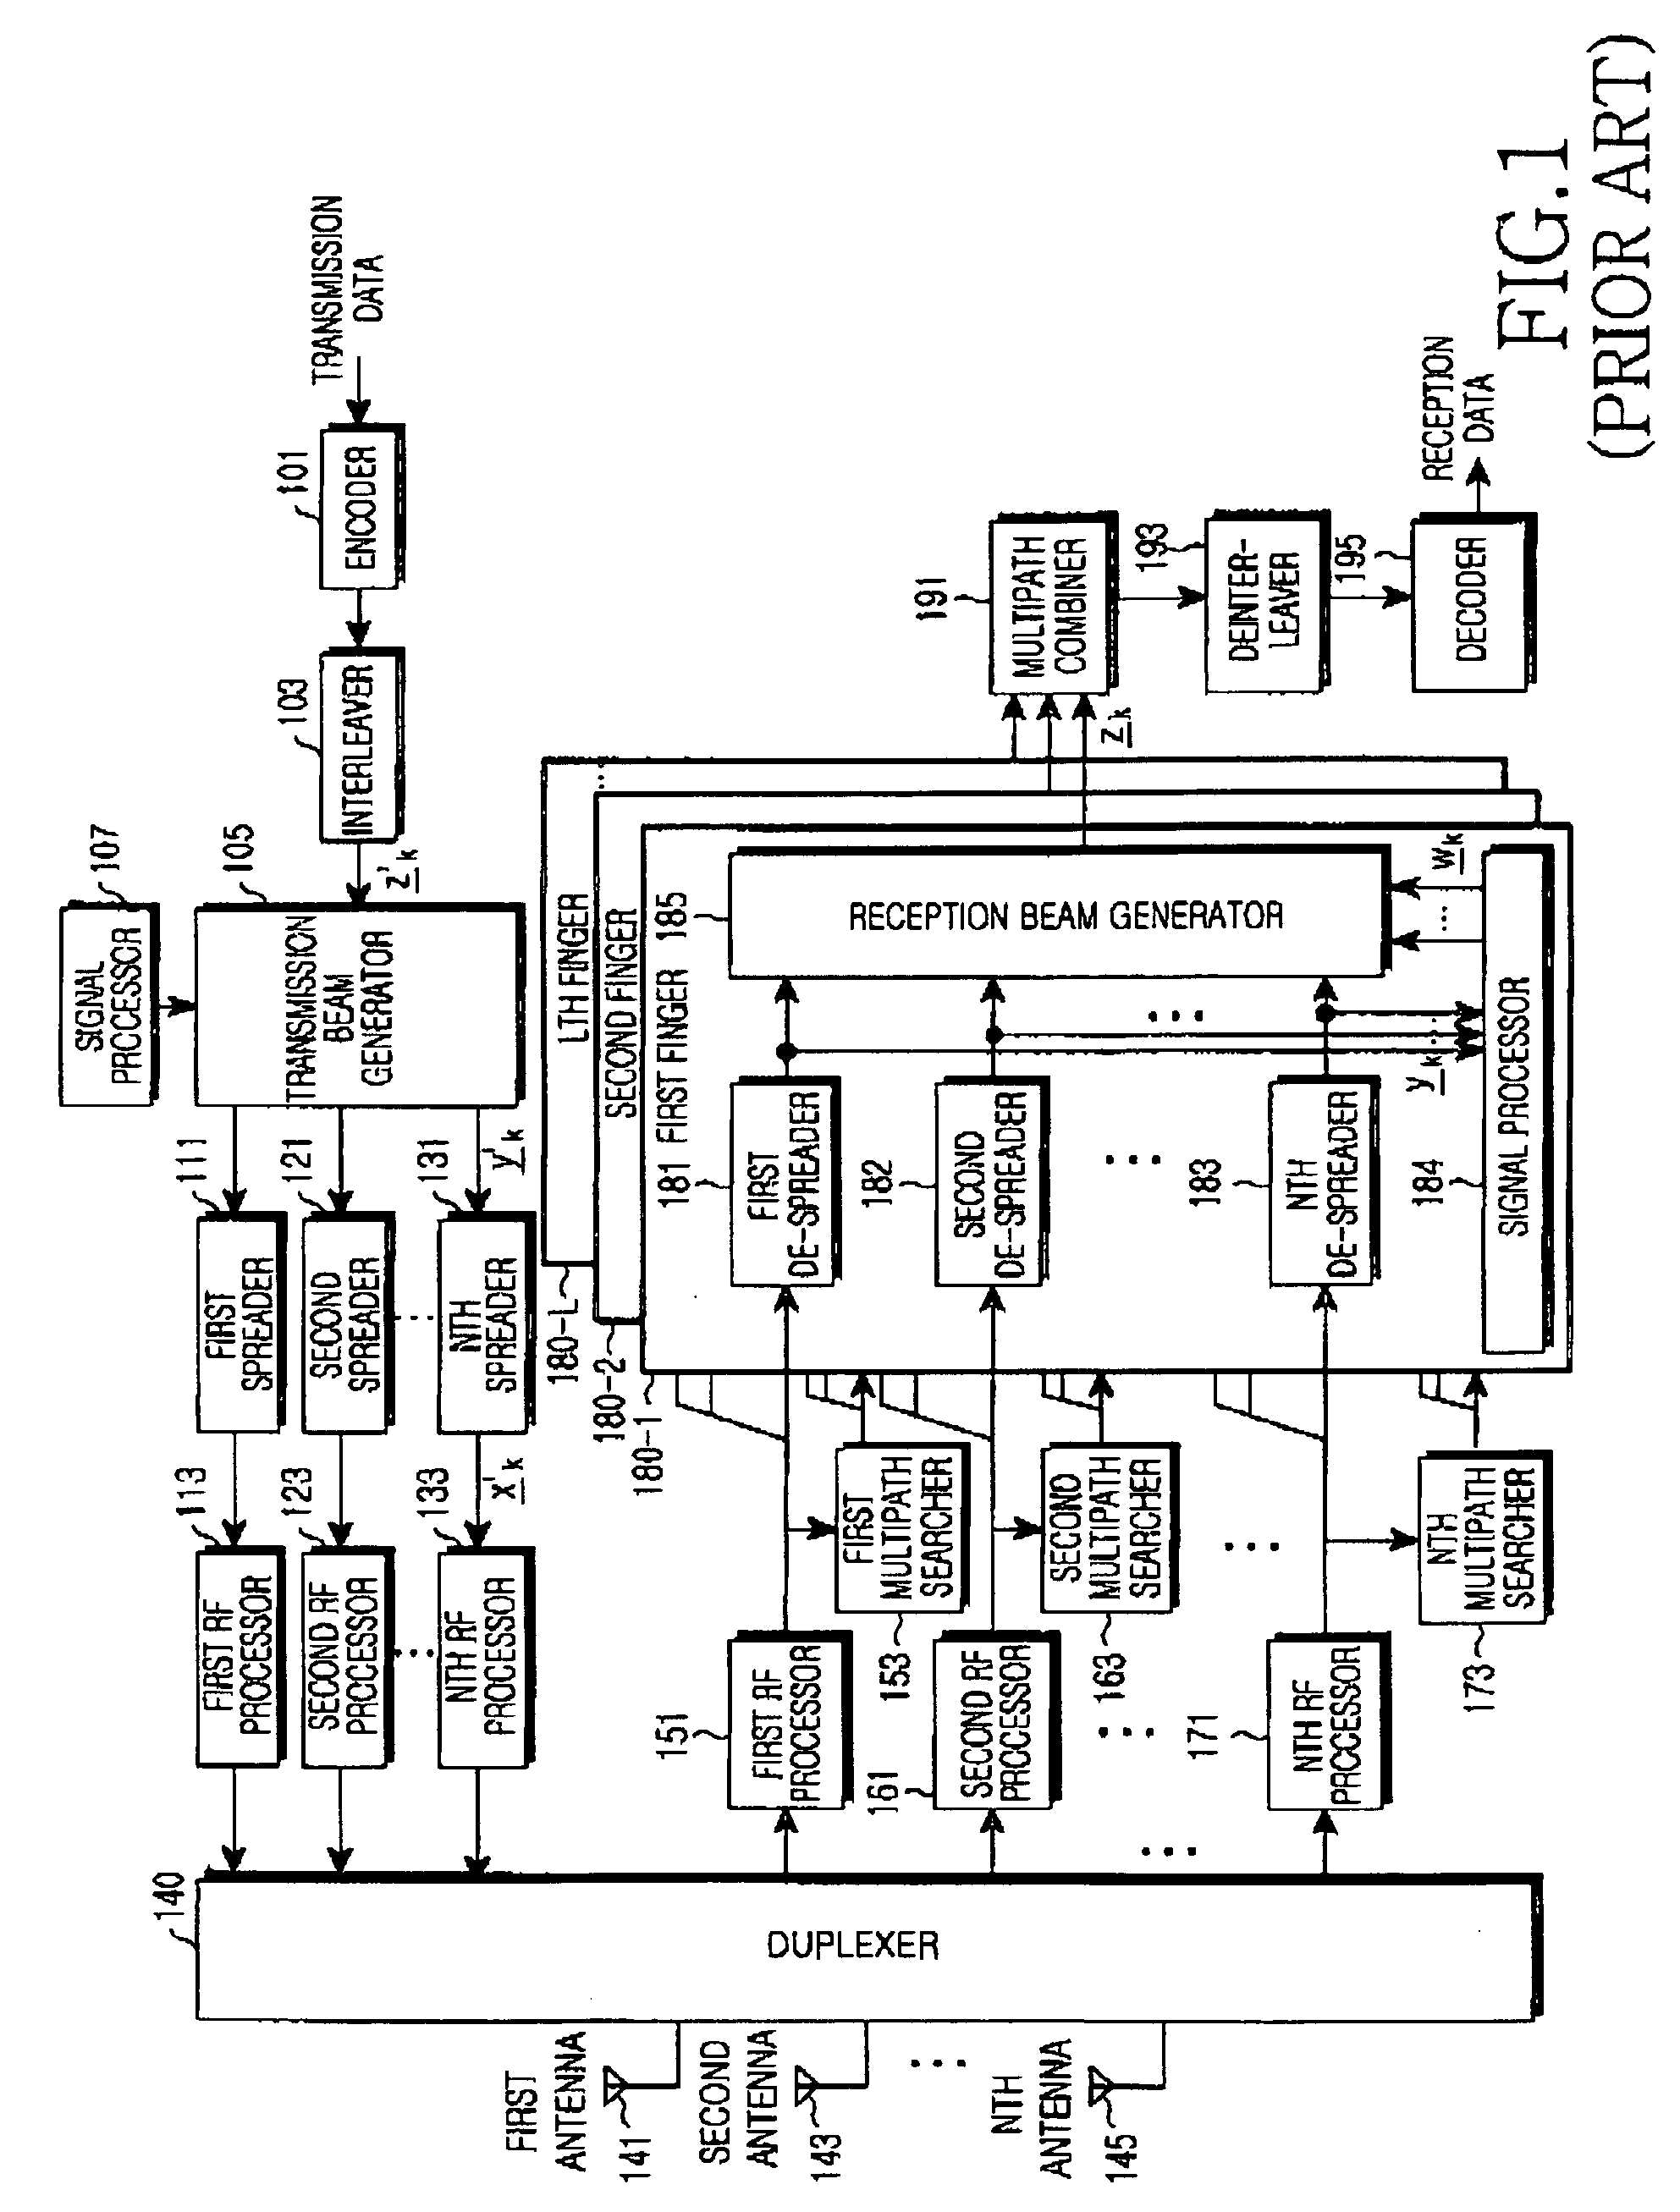 System and method for transmitting and receiving a signal in a mobile communication system using a multiple input multiple output adaptive antenna array scheme